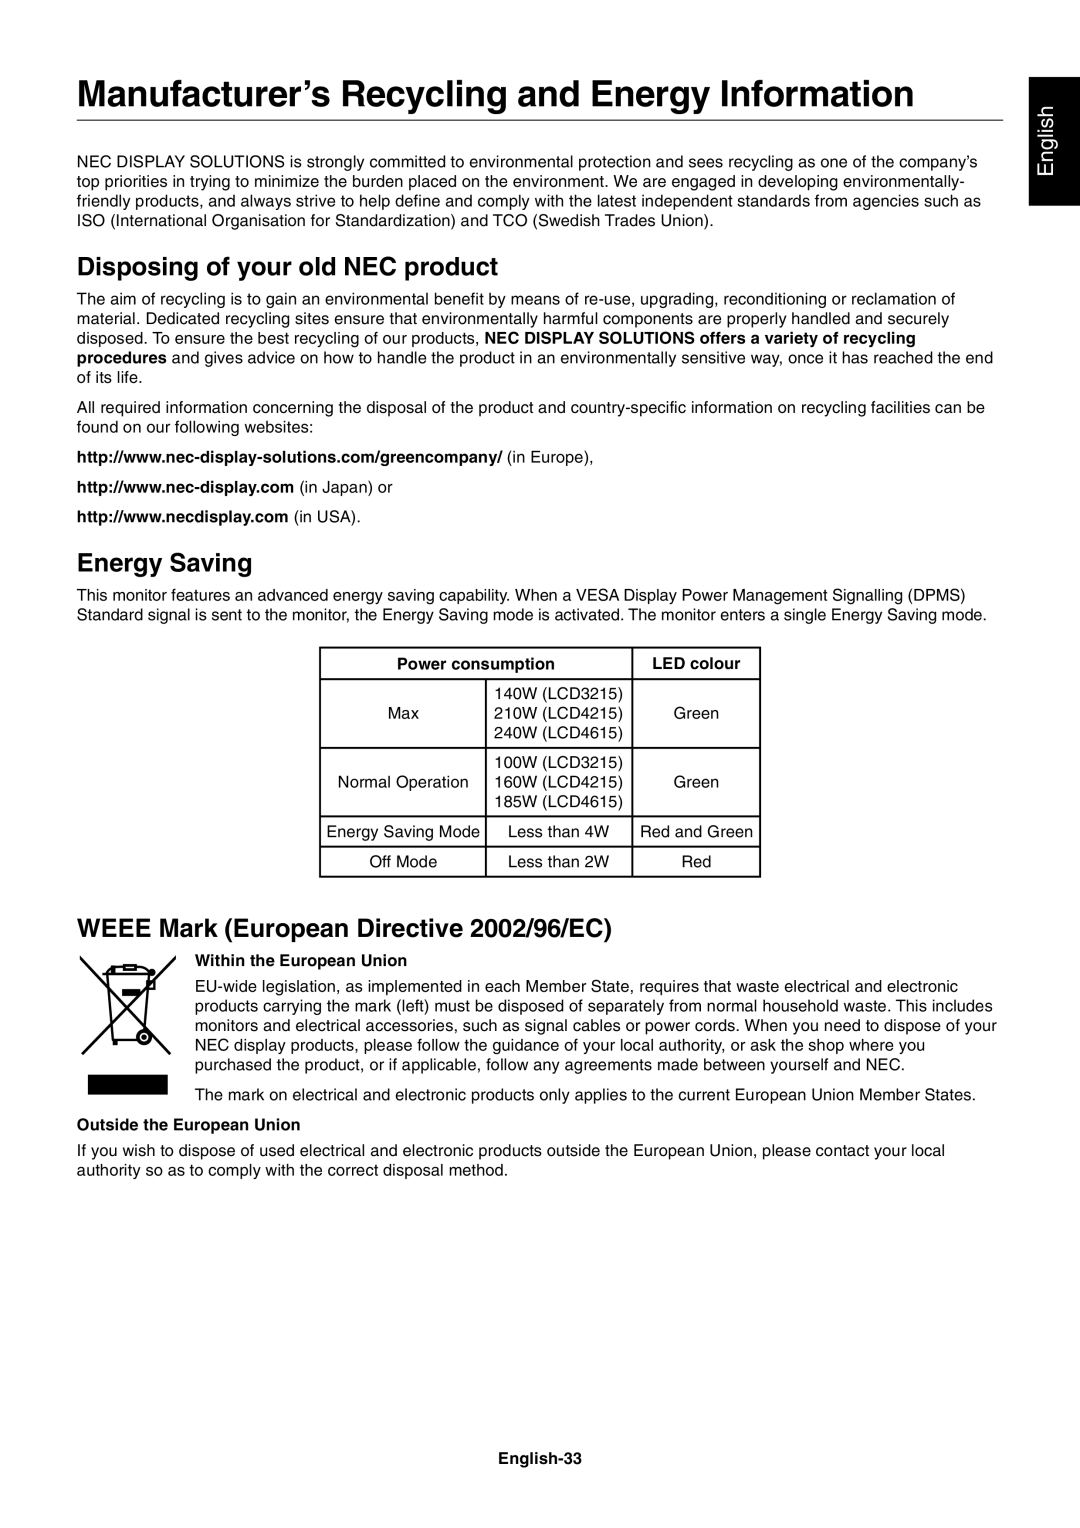 NEC LCD4615 Manufacturer’s Recycling and Energy Information, Disposing of your old NEC product, Energy Saving, English 